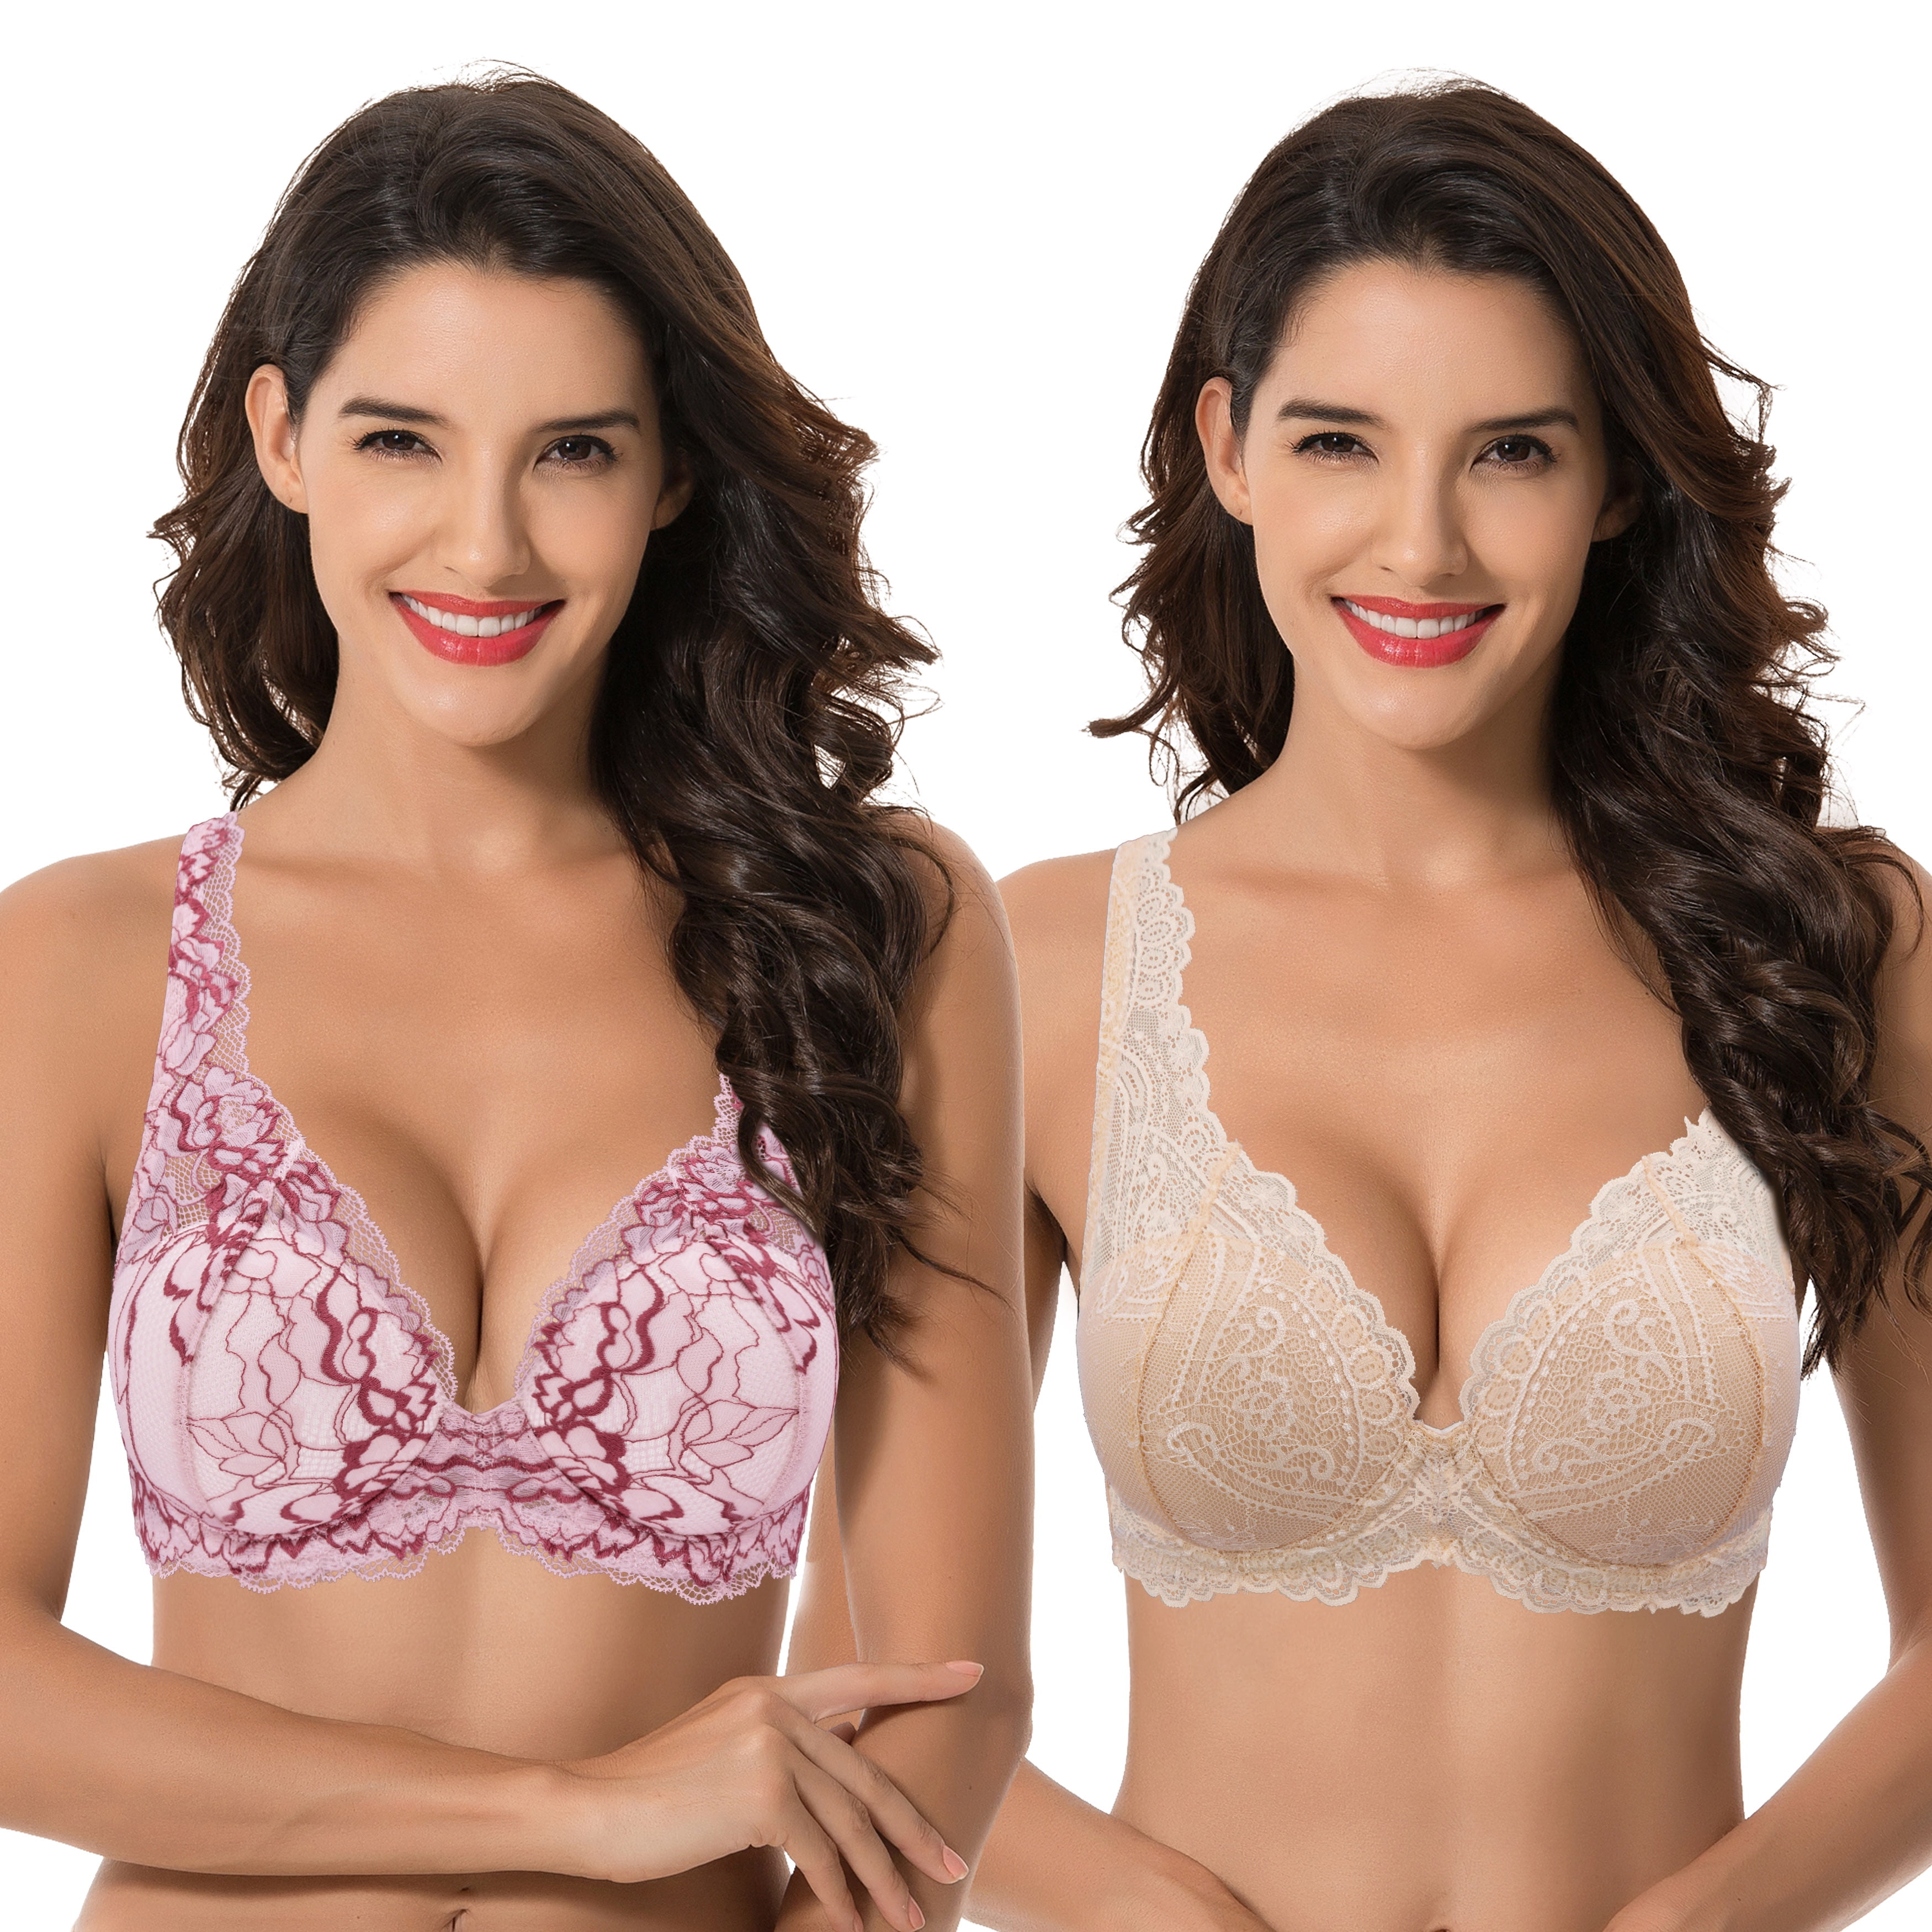 Curve Muse Women's Underwire Plus Size Push Up Add 1 and a Half Cup Lace  Bras-2PK-PINK,Yellow-46DD